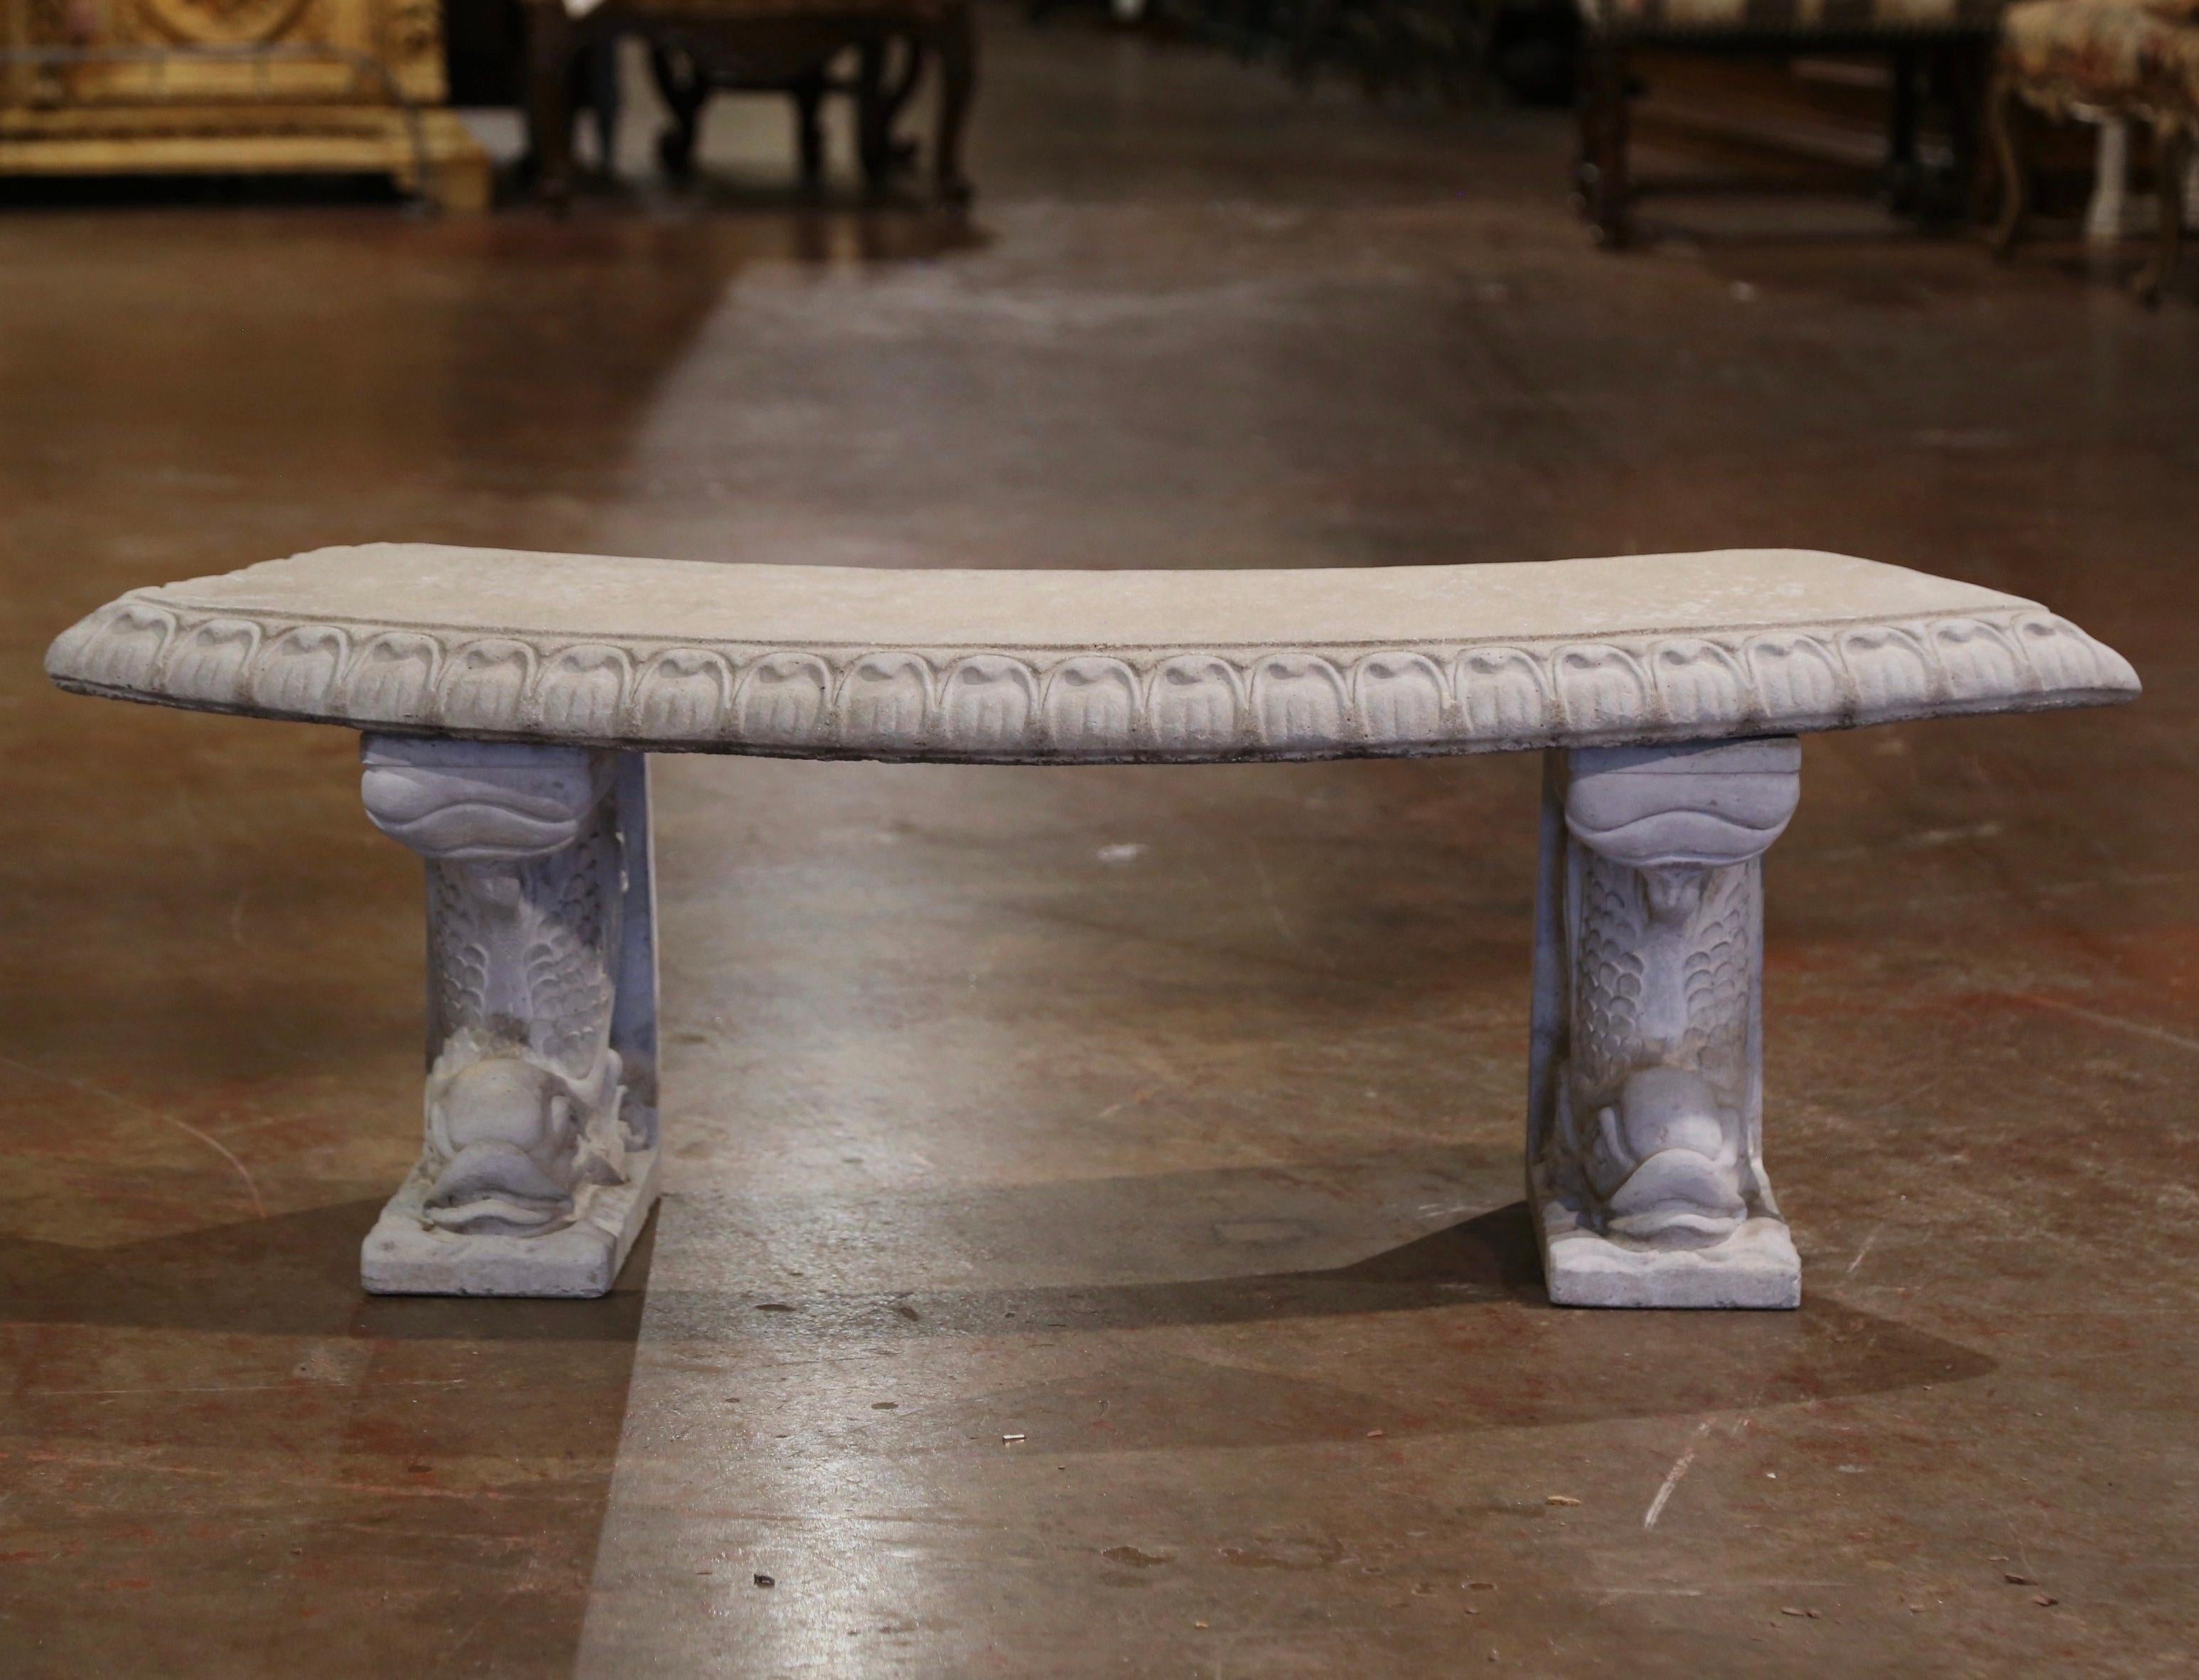 Decorate a garden or a patio with this elegant vintage outdoor bench. Carved in France circa 1960, the stone bench stands on dual carved fish figures bases over a curved seat decorated with egg and dart trim. The seating is in excellent condition